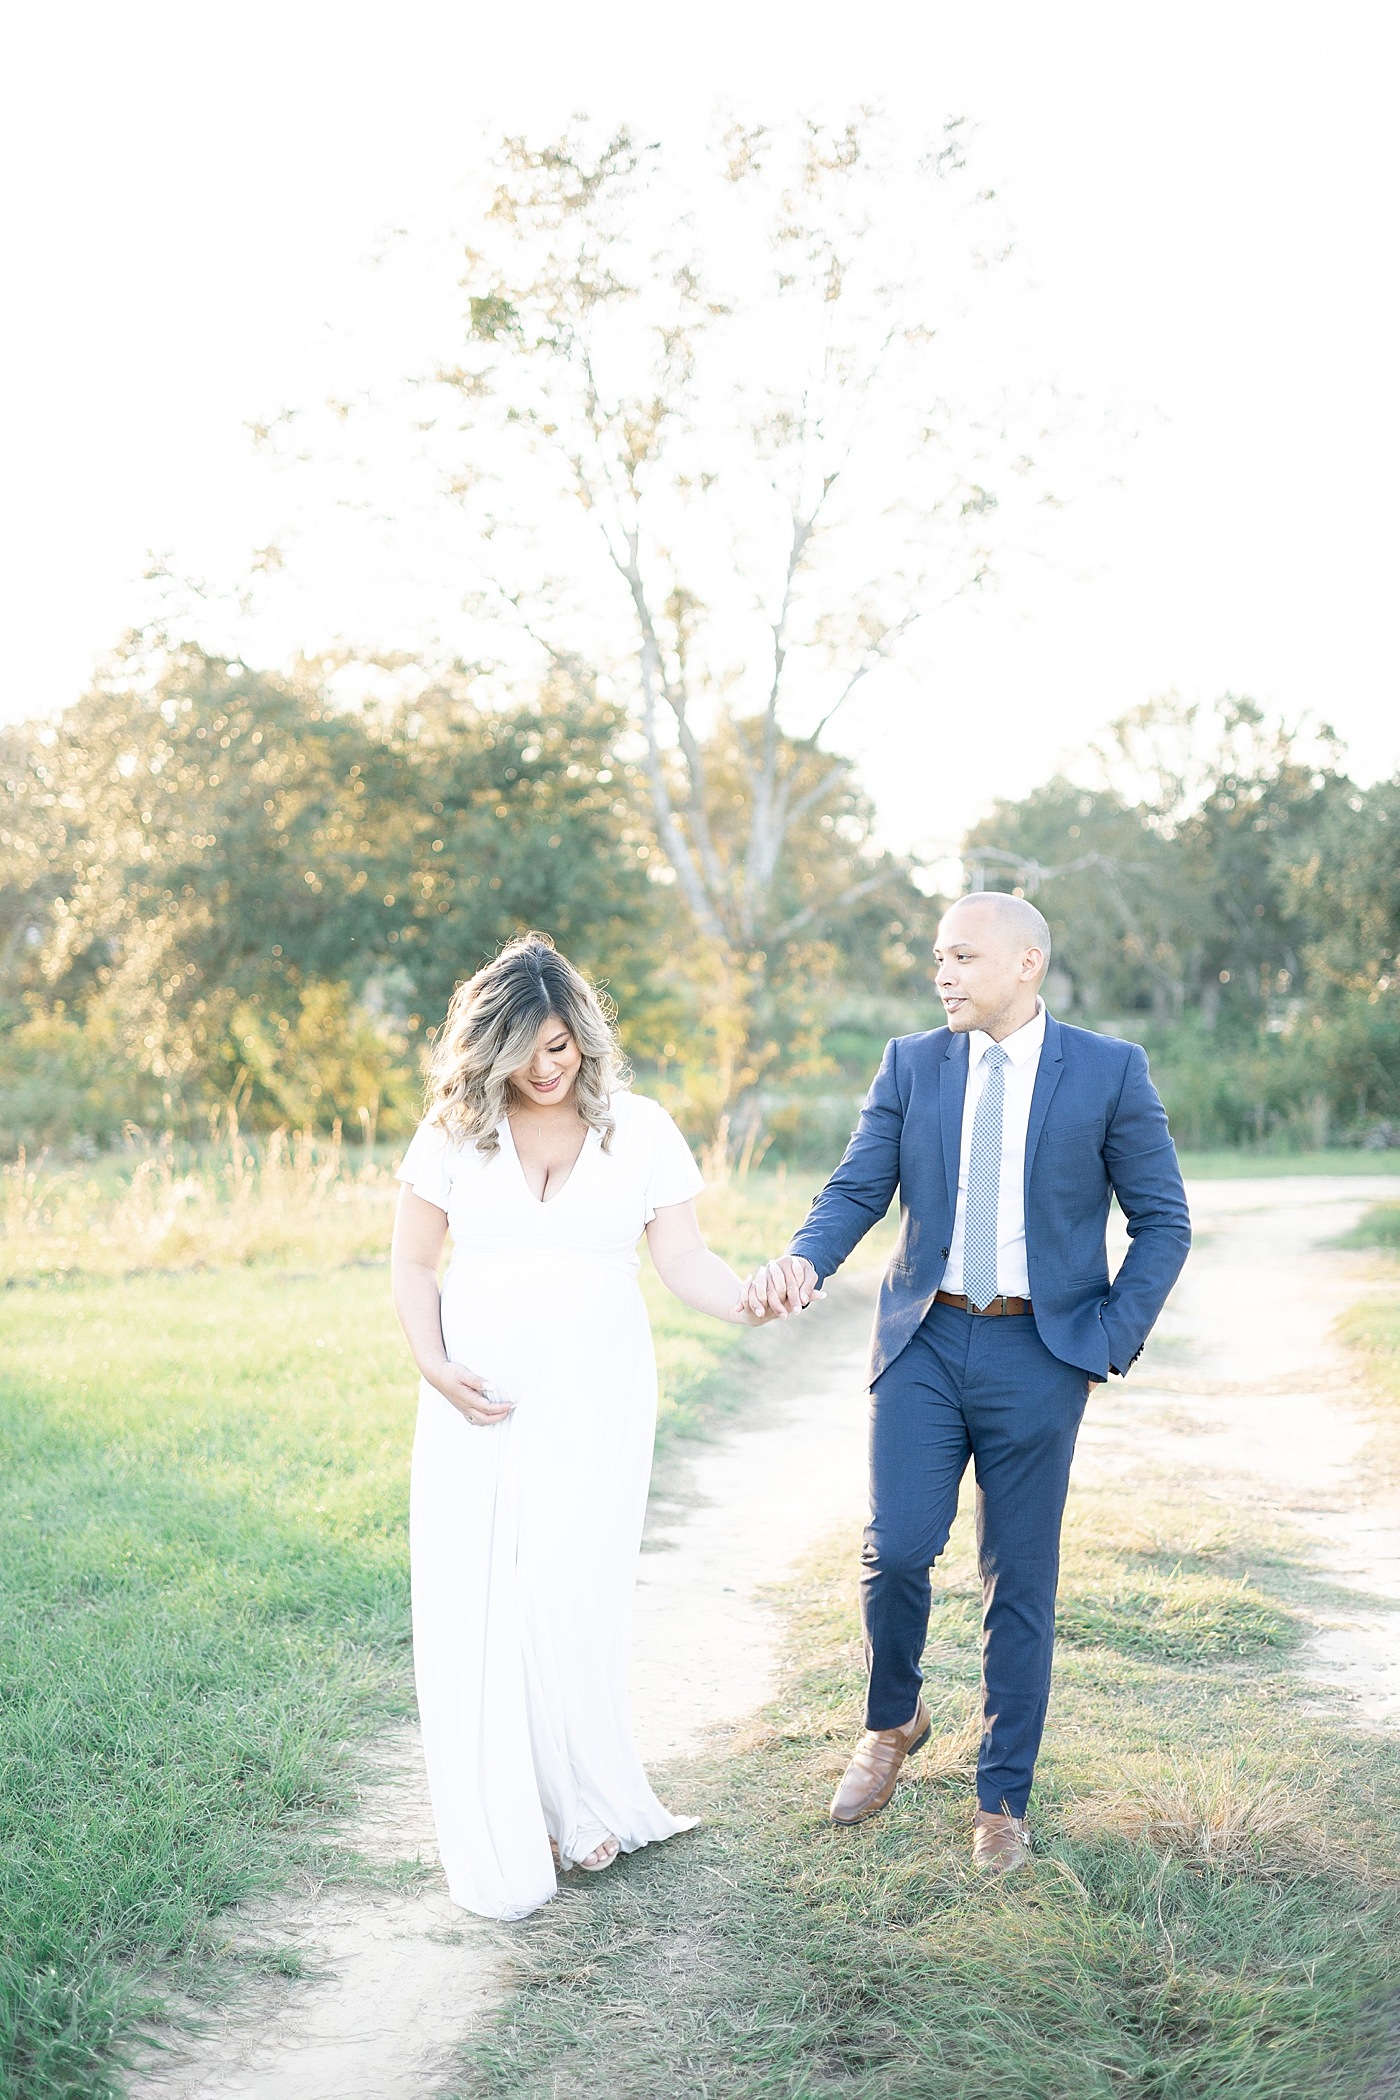 Mom and dad to be walking a dirt path | Photo by Gulfport MS Maternity and Newborn Photographer Little Sunshine Photography 